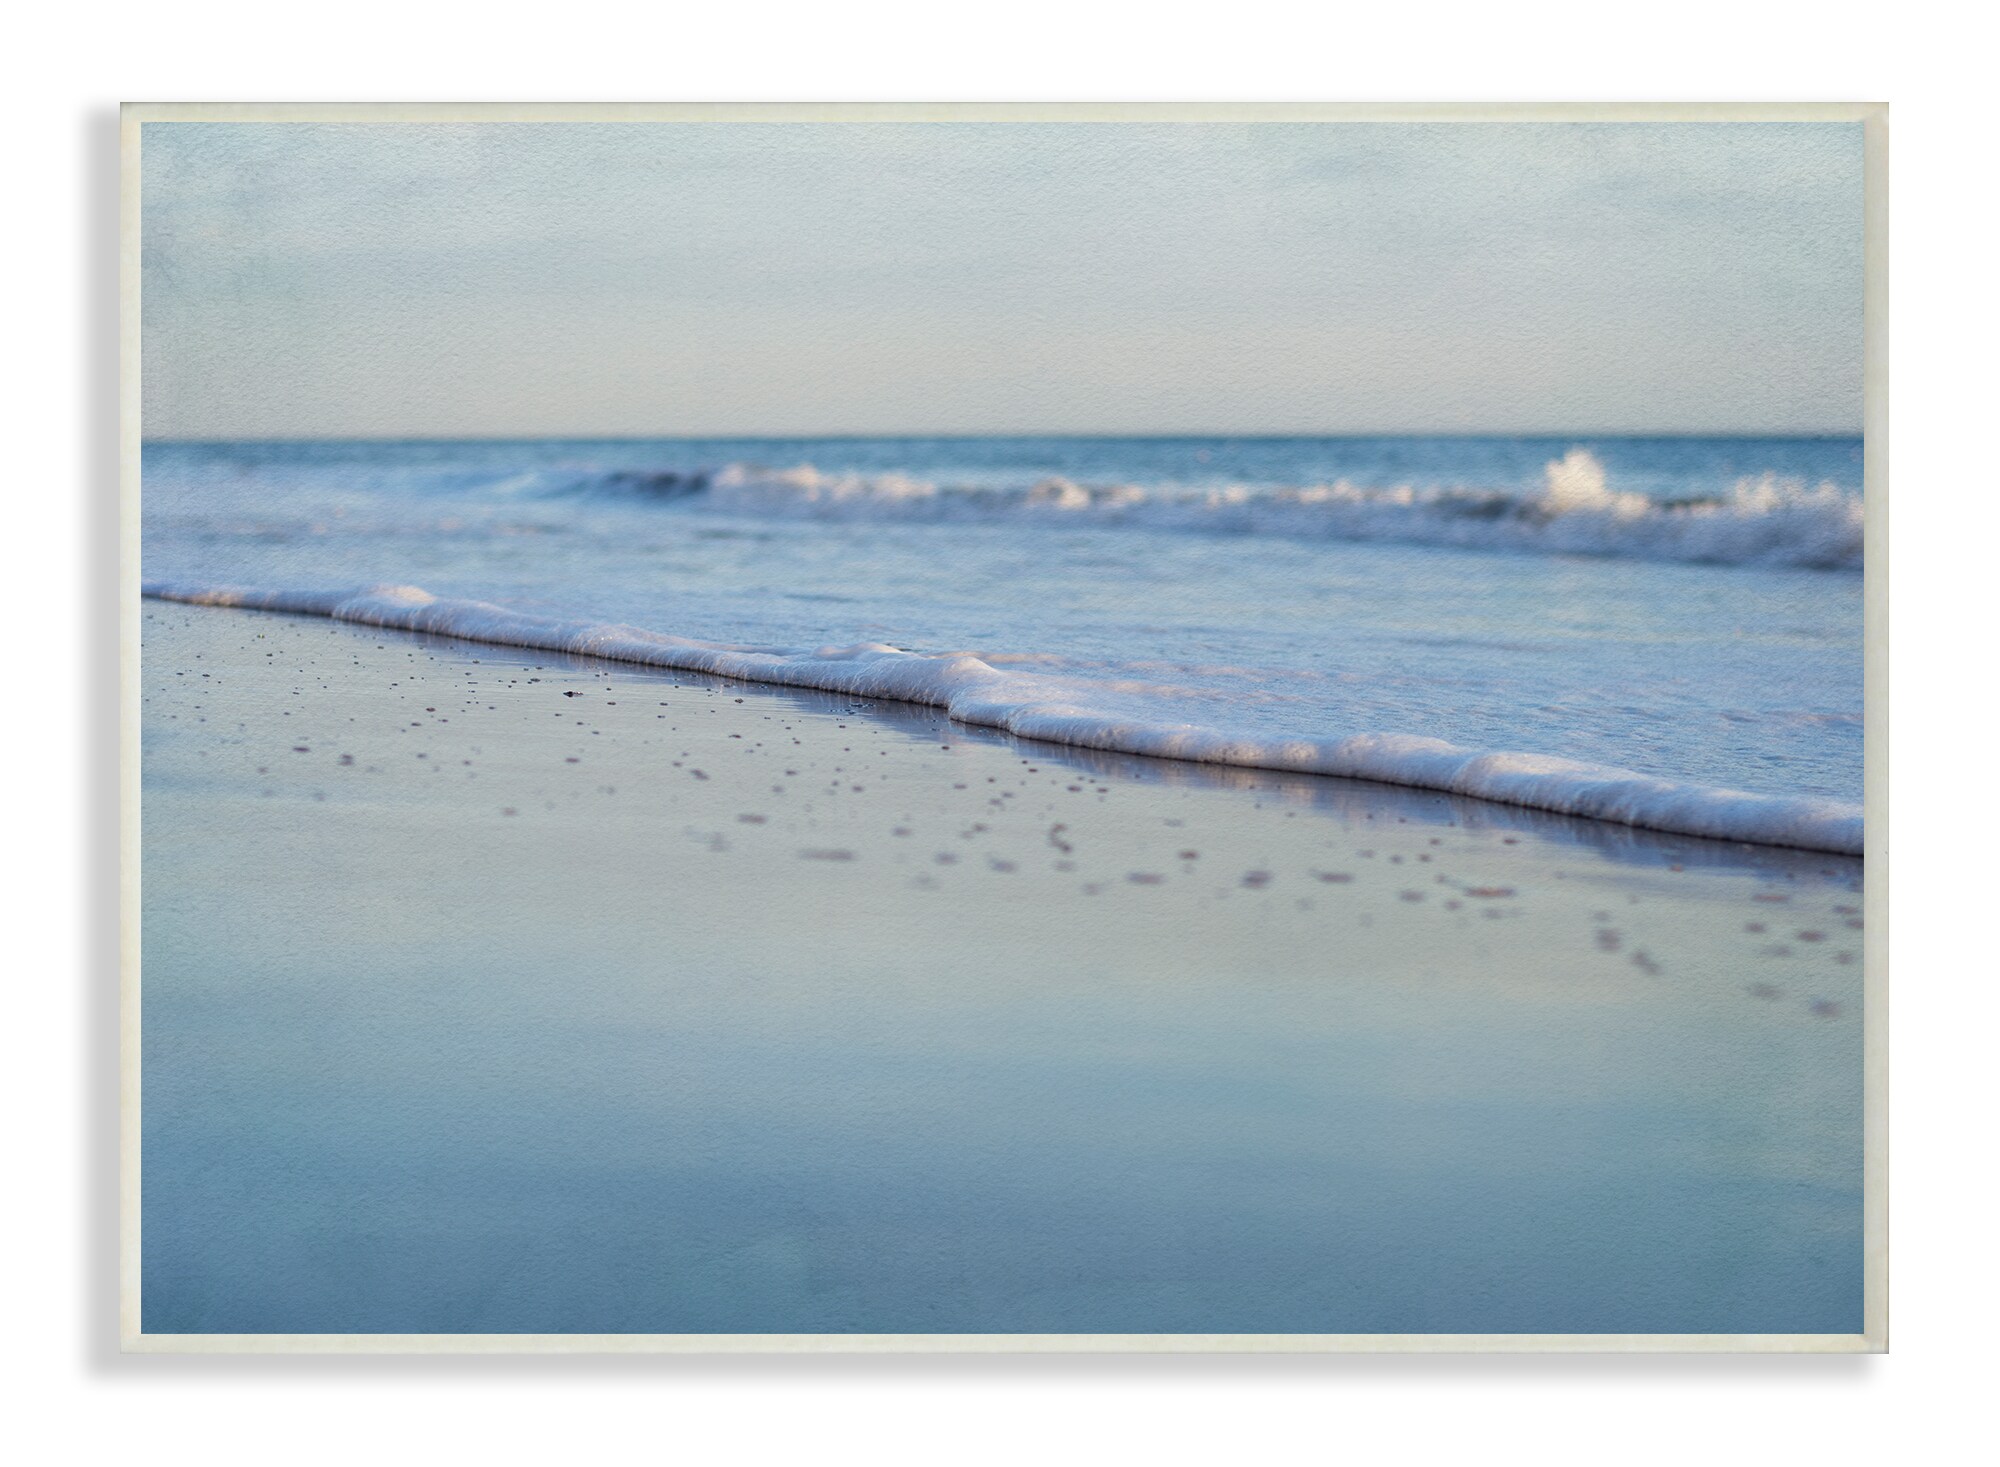 The Stupell Home Decor Collection Coastal Evening Beach Gentle Surf Photograph Wall Plaque Art, 10 x 0.5 x 15, Size: 10 x 15